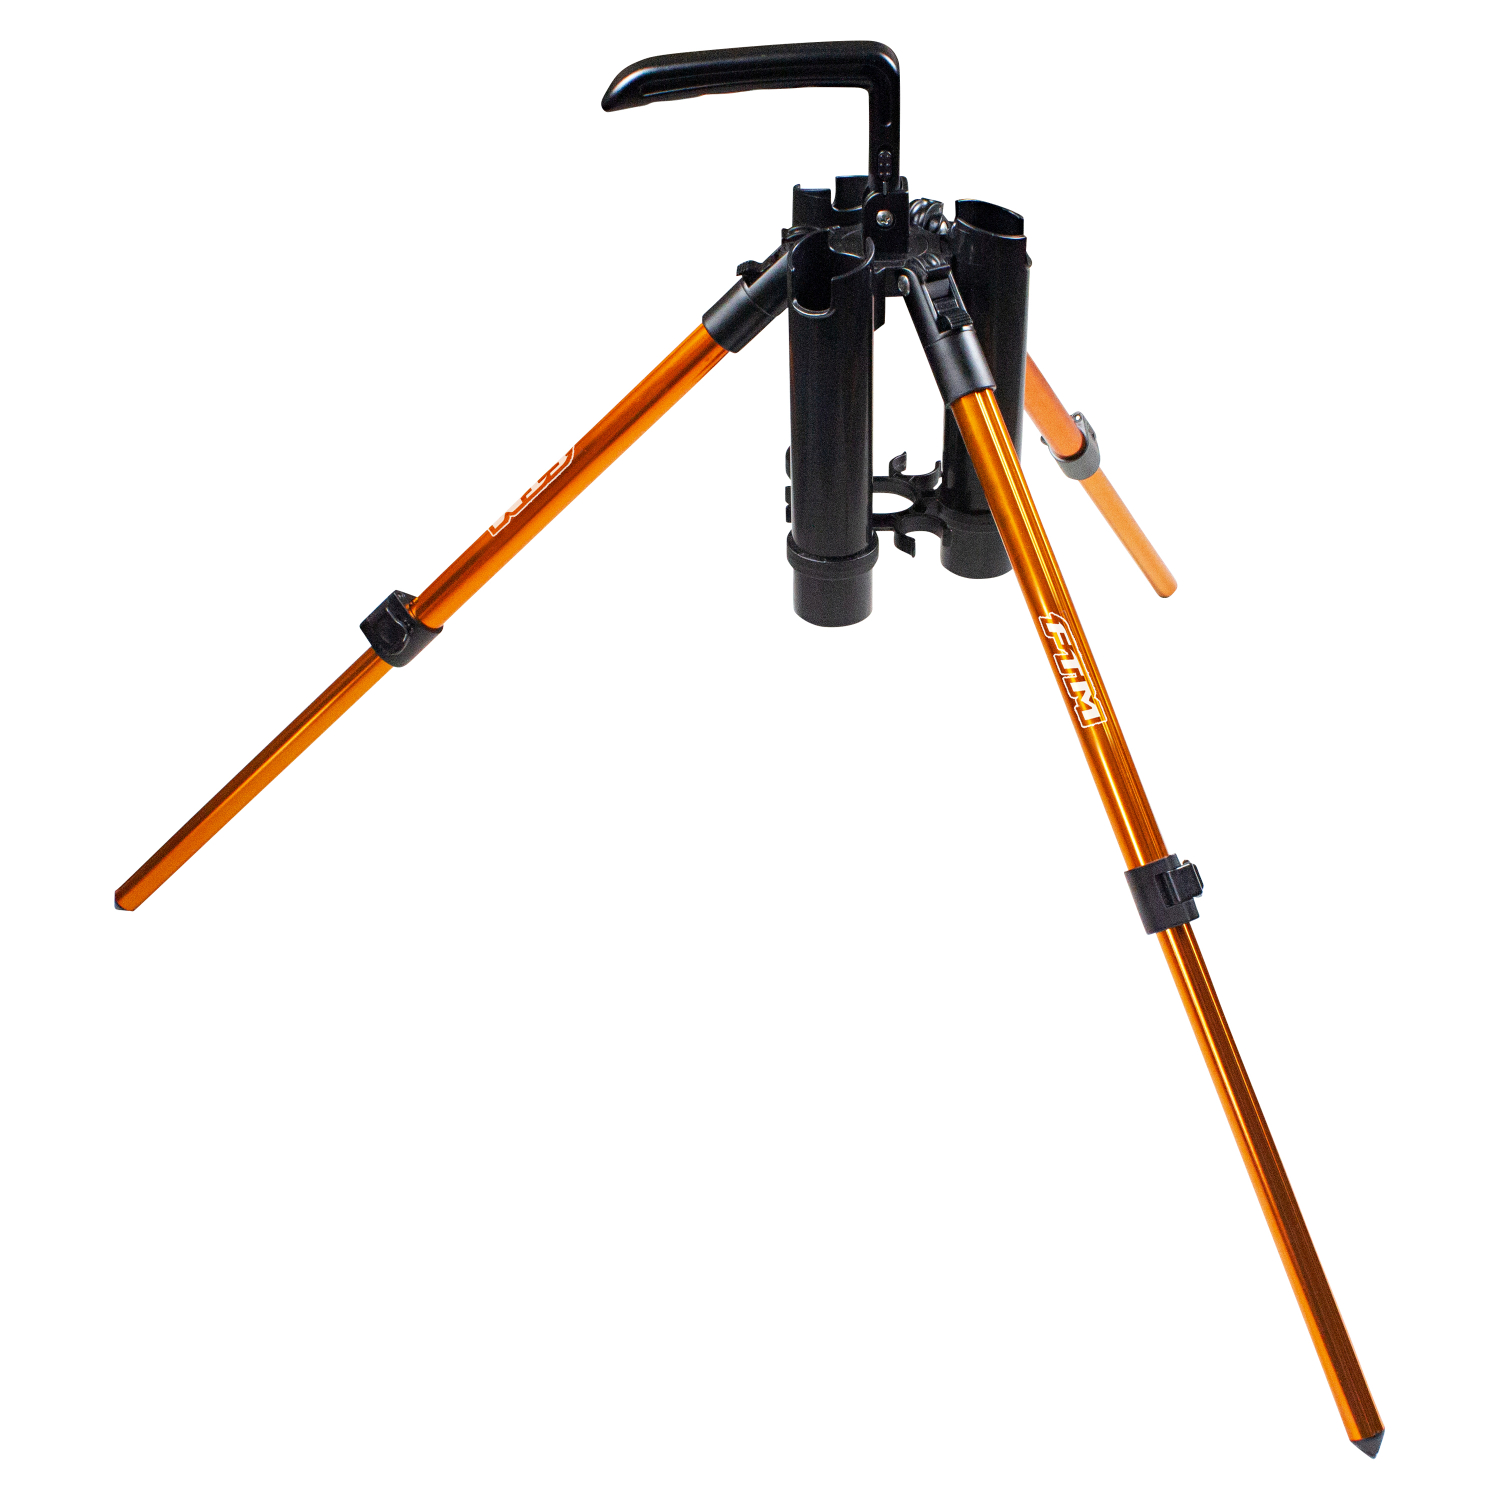 FTM Spoon rod holder tripod at low prices